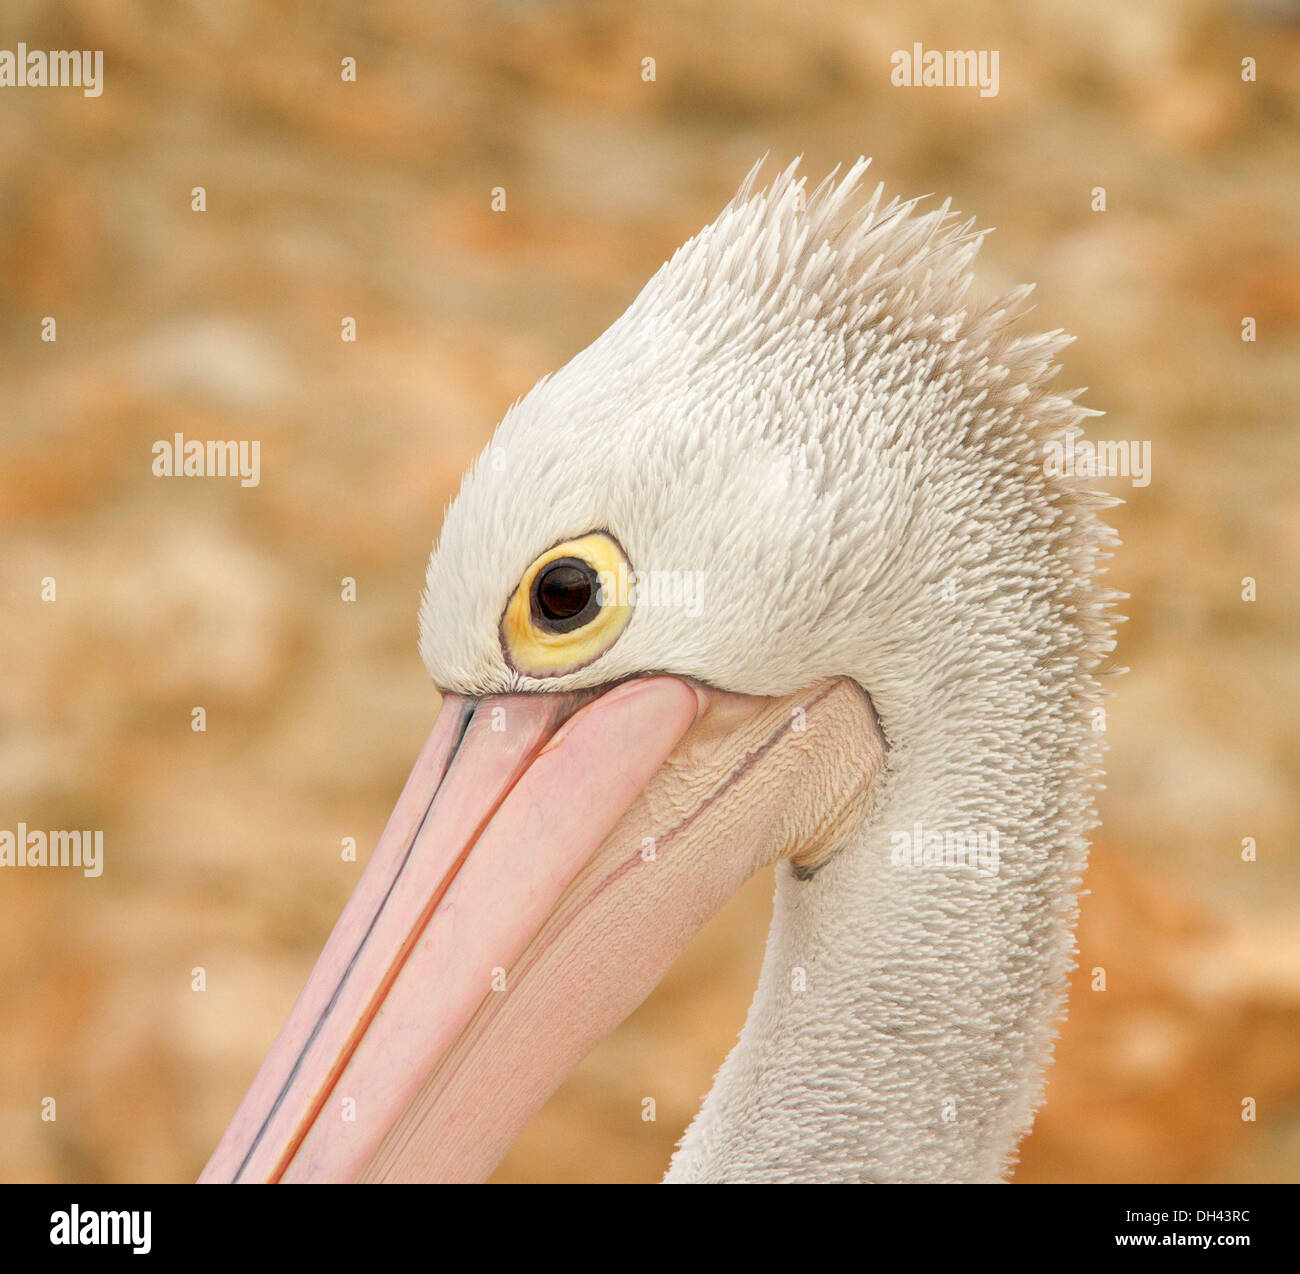 Striking close up portrait of face of Australian pelican with large bright eye & against light sandy brown background Stock Photo